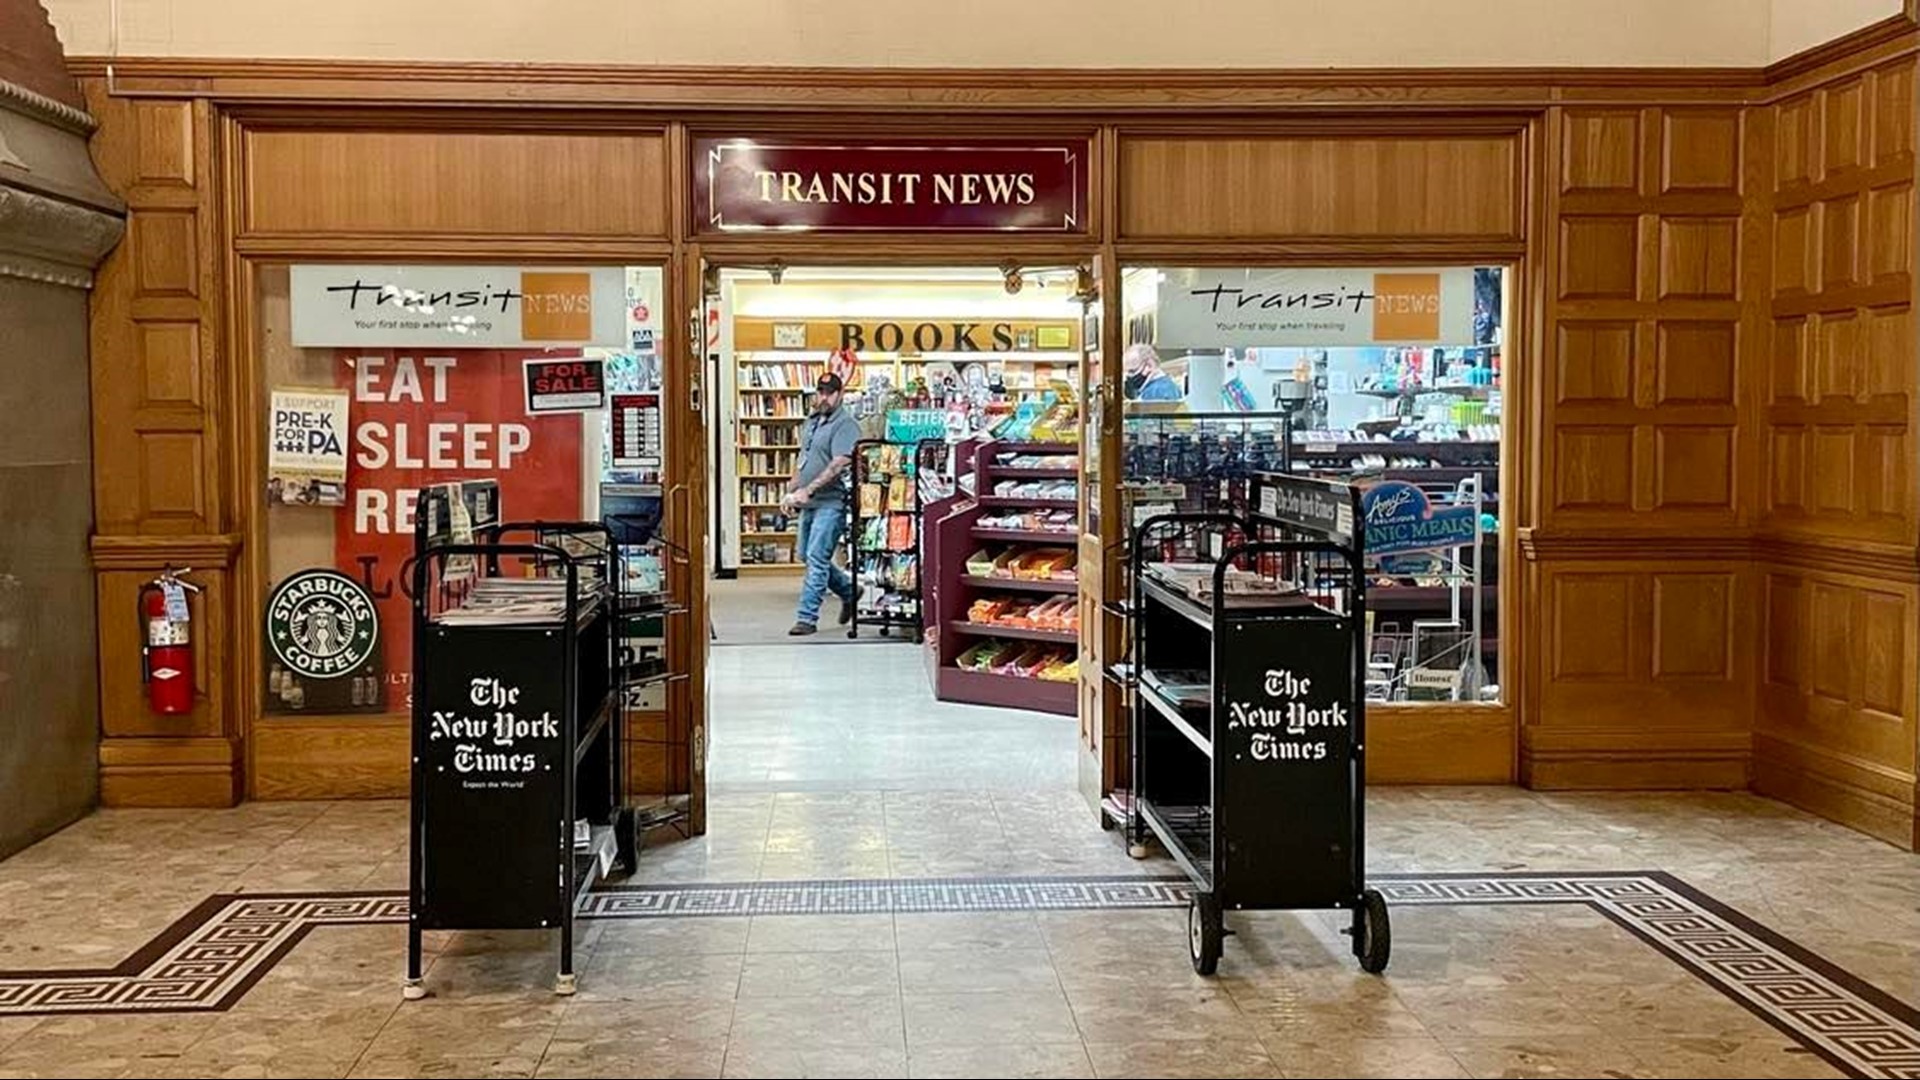 Transit News is the last newsstand in Harrisburg.